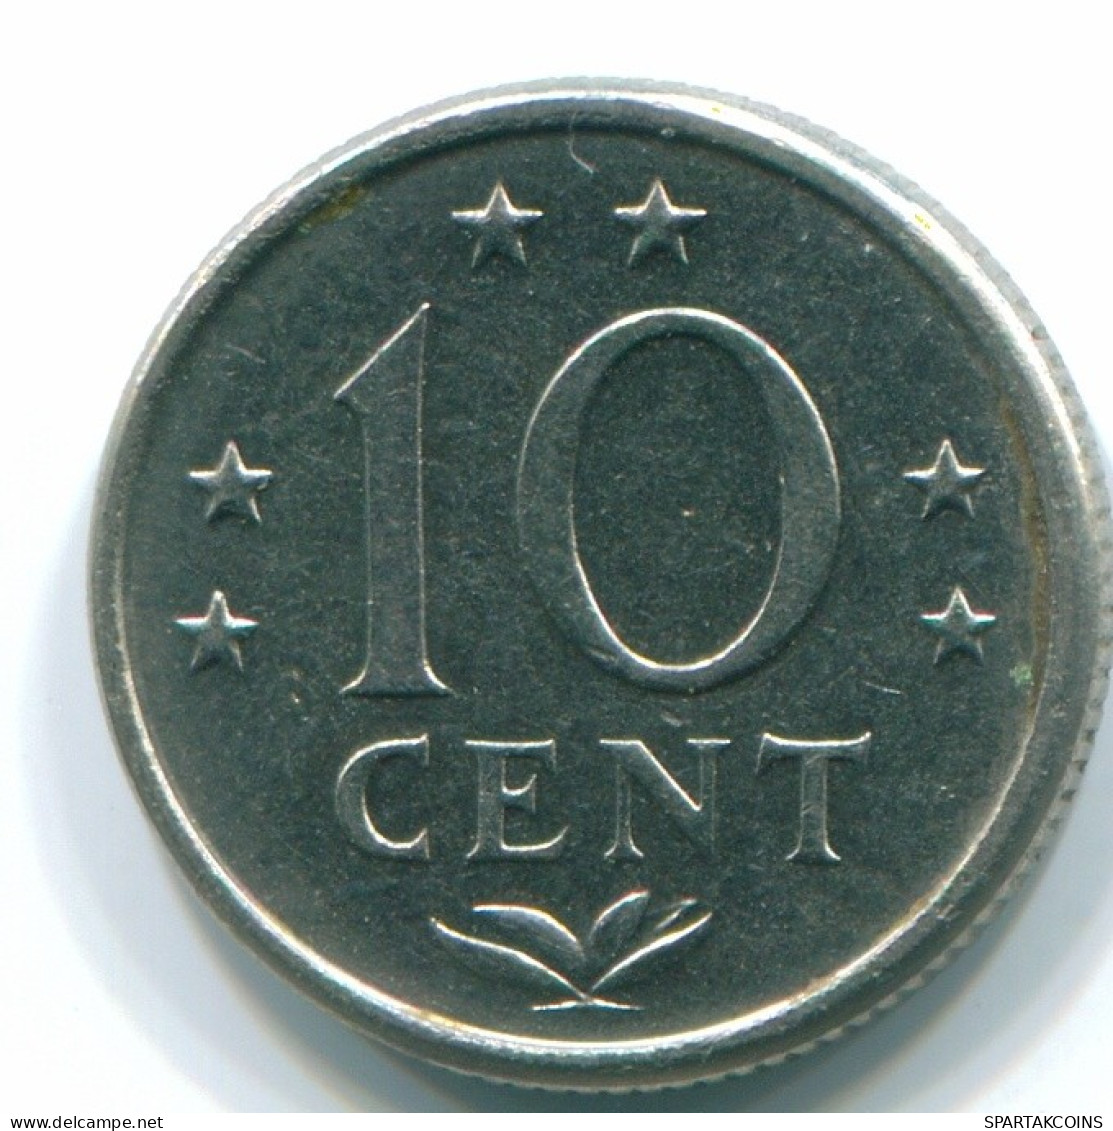 10 CENTS 1974 NETHERLANDS ANTILLES Nickel Colonial Coin #S13495.U.A - Netherlands Antilles